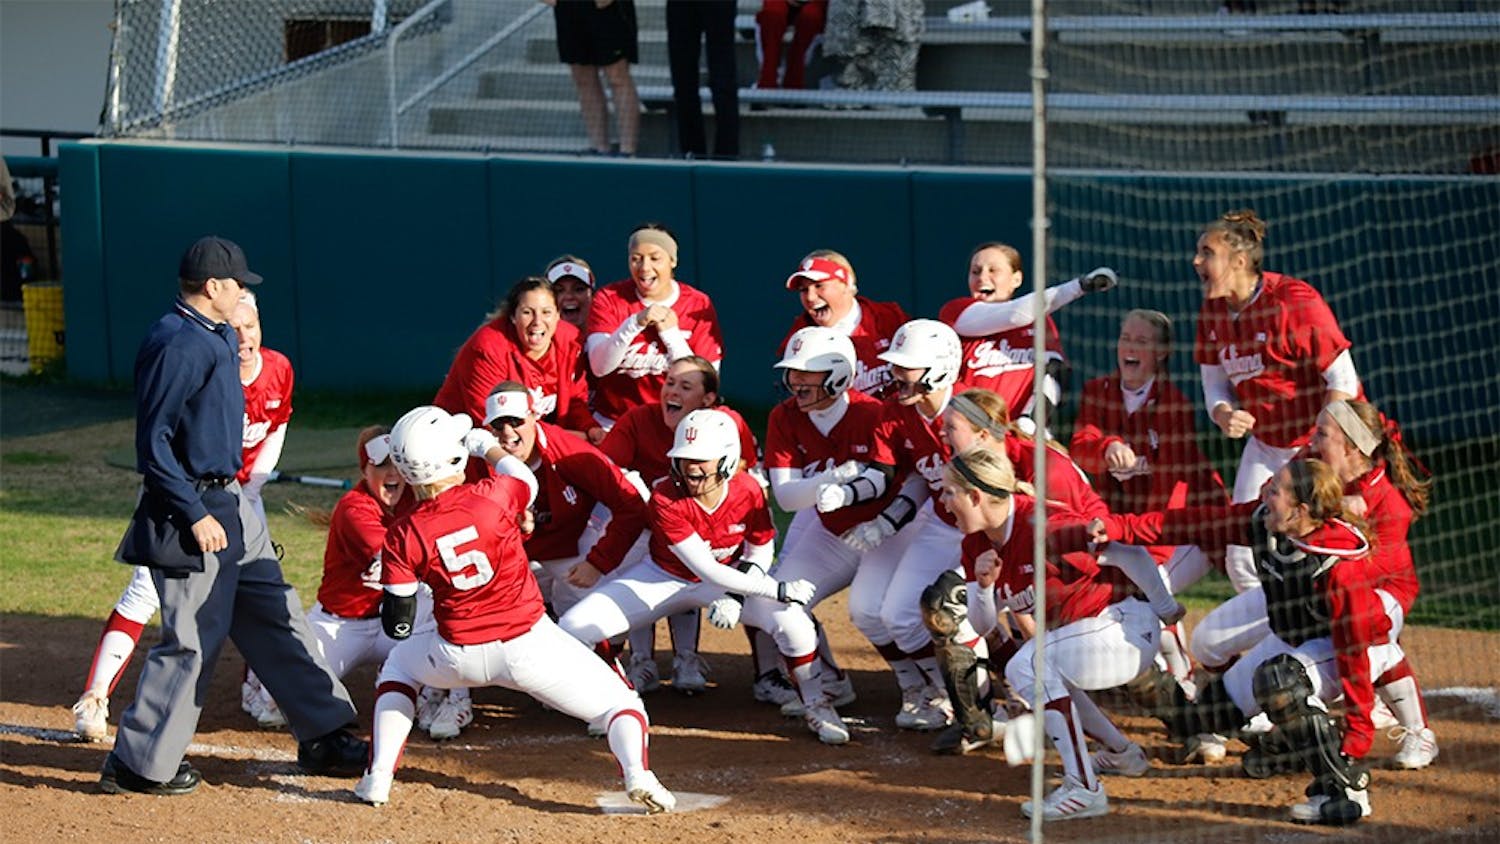 Members of the IU Softball team celebrate after freshman Mena Fulton hit a 3-run home run during the last inning of IU's game against Purdue April 22, 2015 at the Andy Mohr Field; resulting in a 6-3 win for the hoosiers.